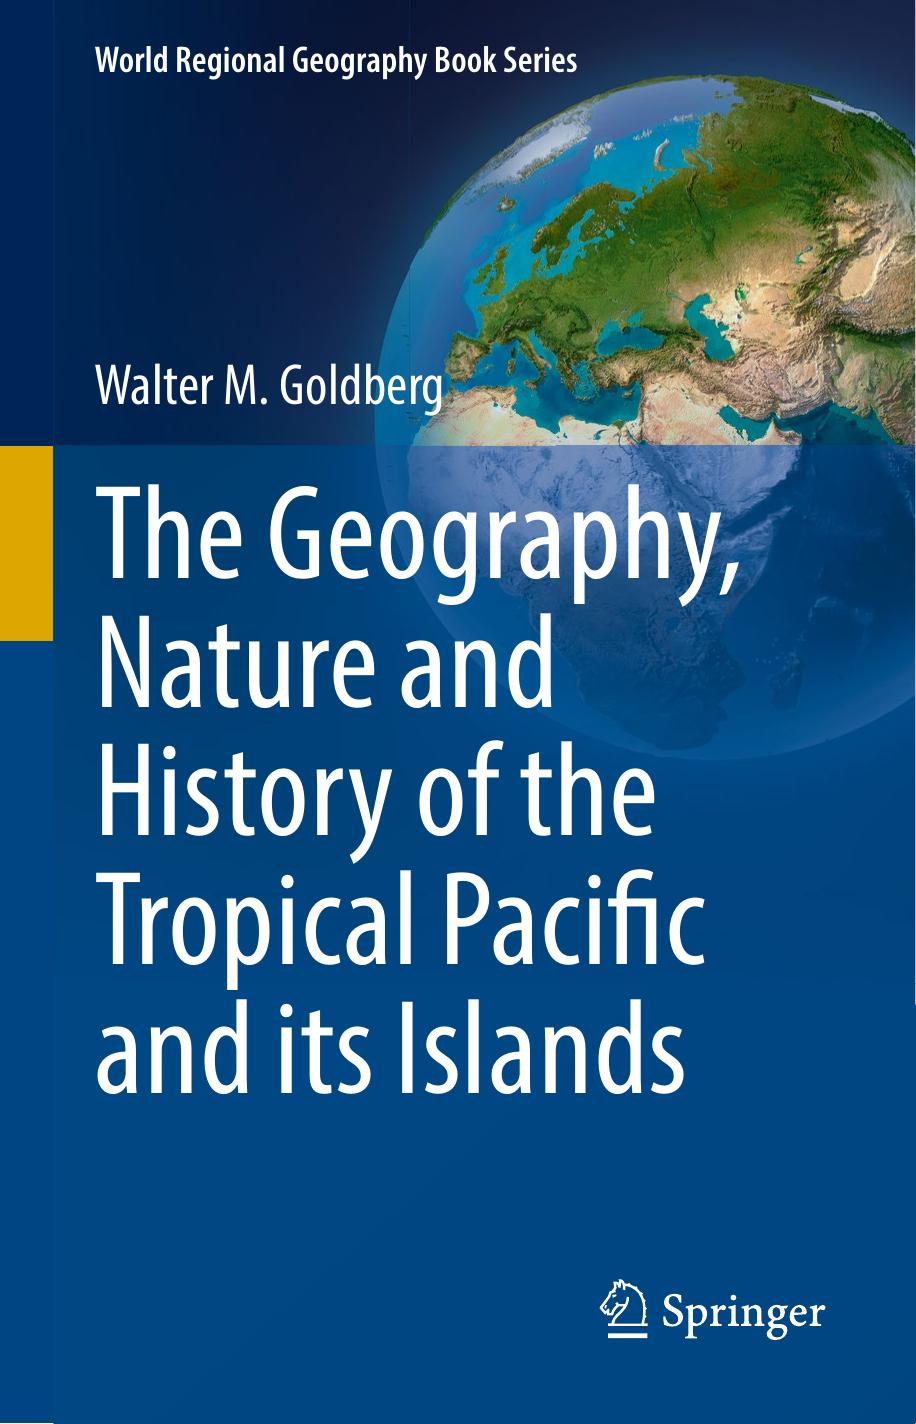 The Geography, Nature and History of the Tropical Pacific and its Islands 2018